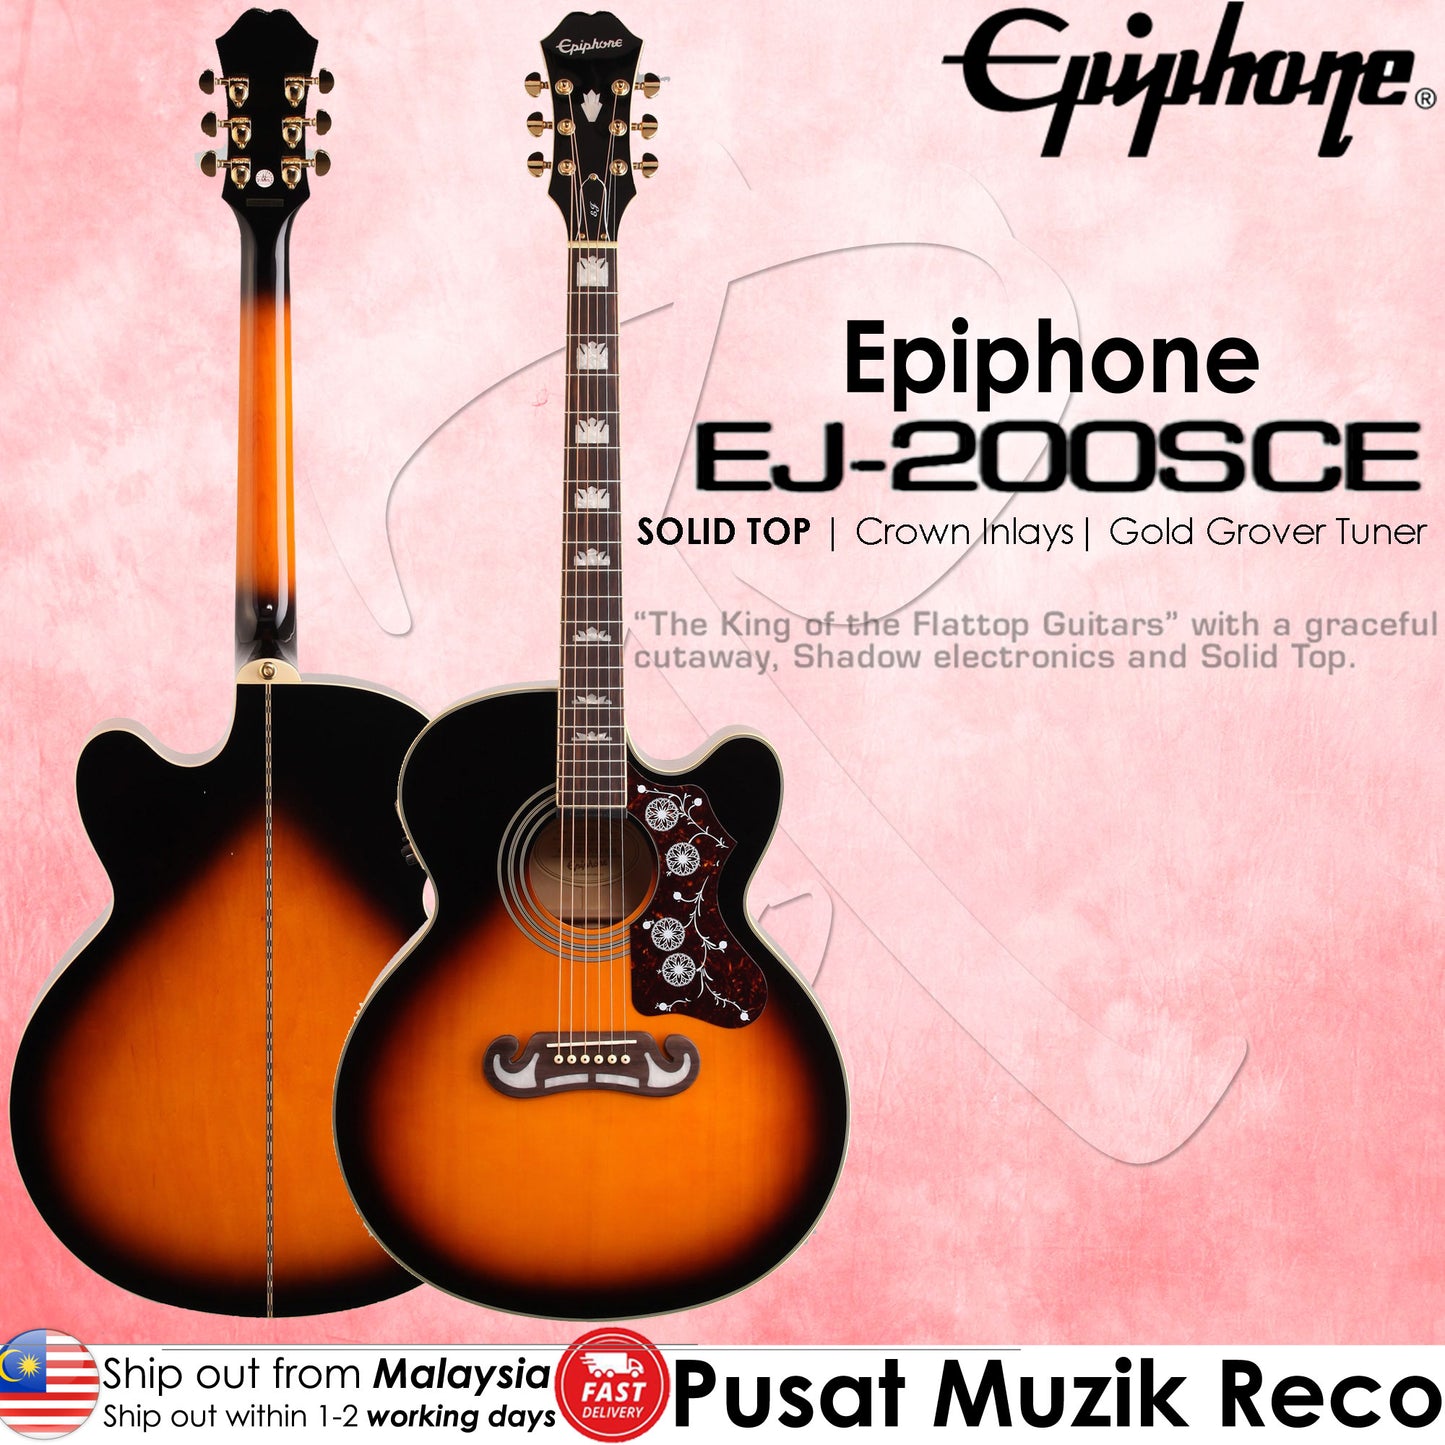 Epiphone EJ-200SCE Vintage Sunburst Solid Top Acoustic Guitar - Reco Music Malaysia